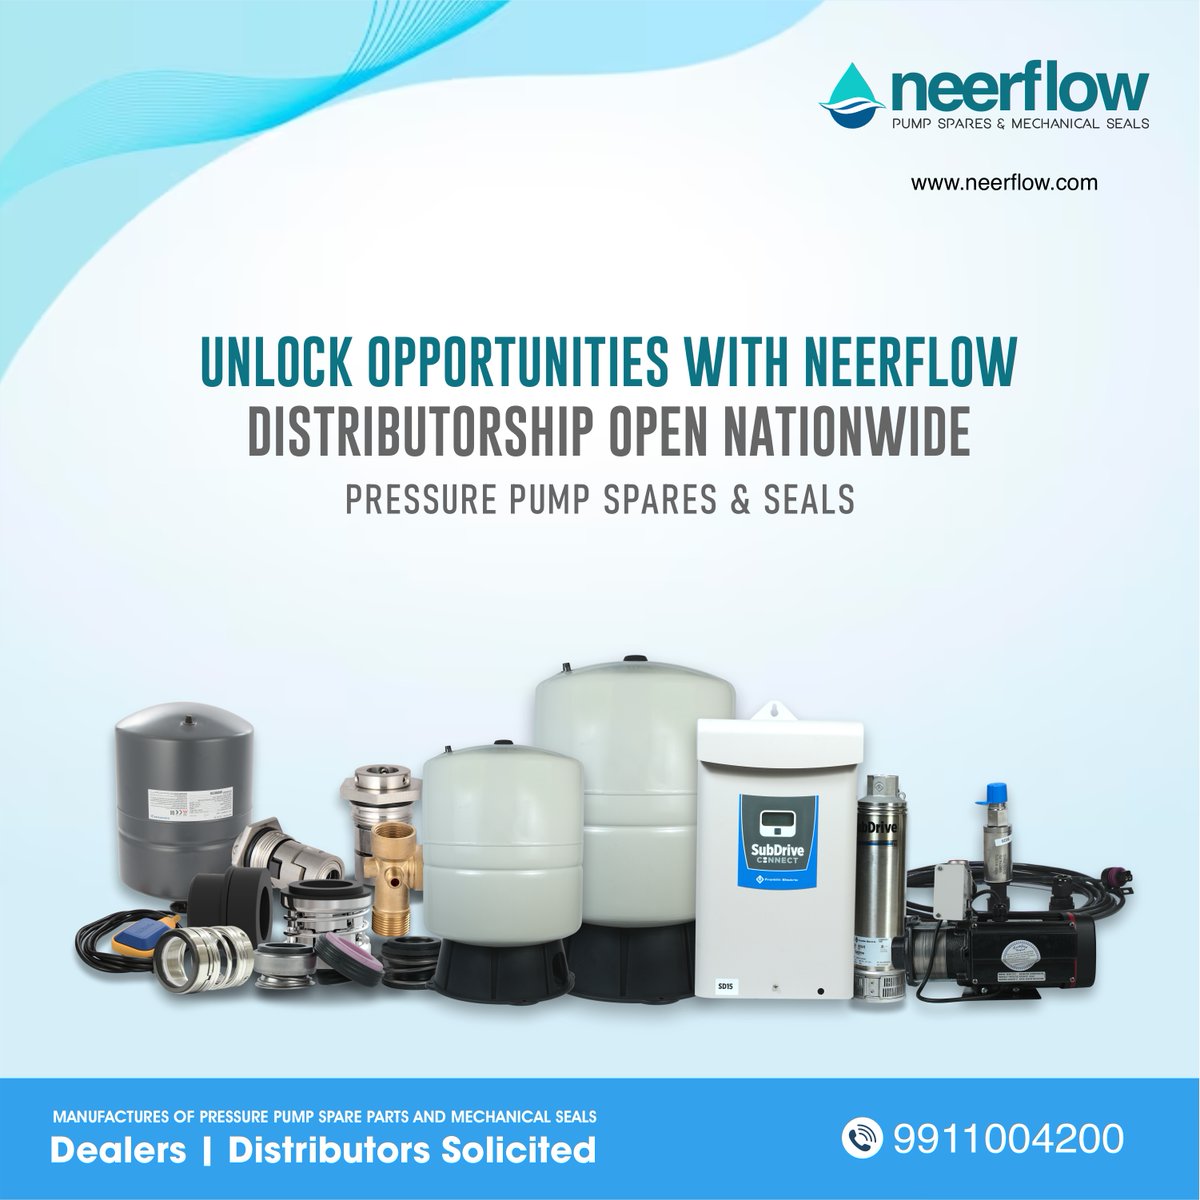 Neerflow invites dynamic individuals and businesses to join our network as dealers/distributors. With our top-notch spares and seals, you'll offer customers unparalleled reliability and performance. Don't miss this chance to grow your business with Neerflow!
#PumpIndustry #pumps